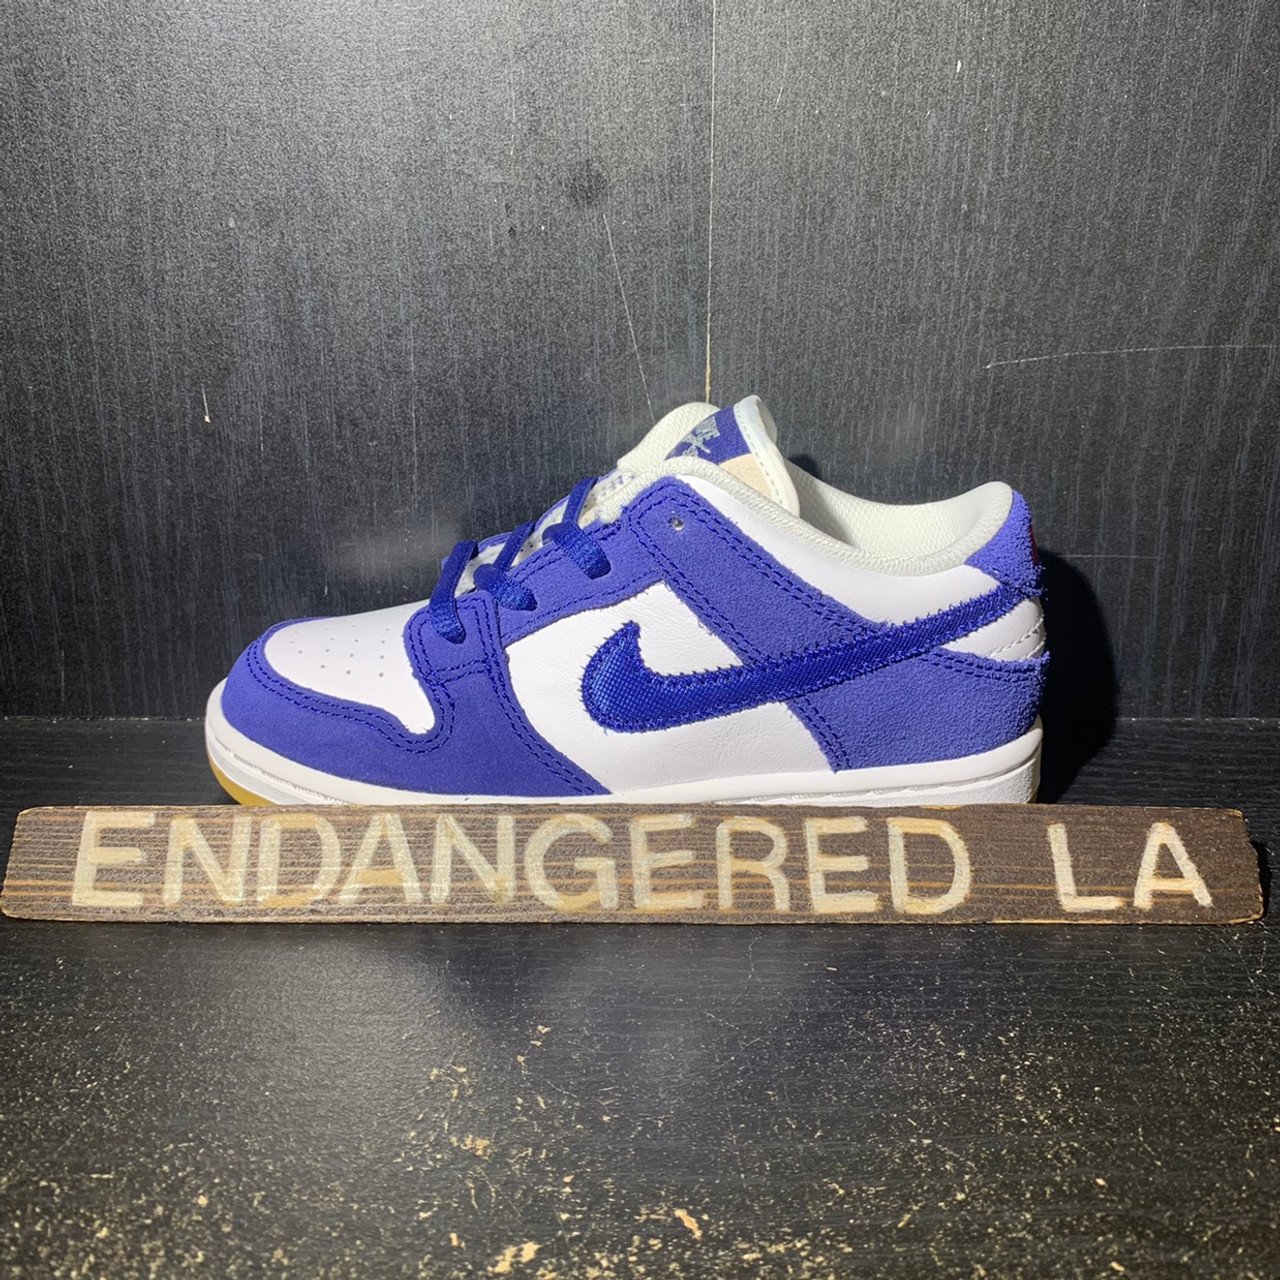 Nike SB Dunk Low “Los Angeles Dodgers” Gets a Release Date and